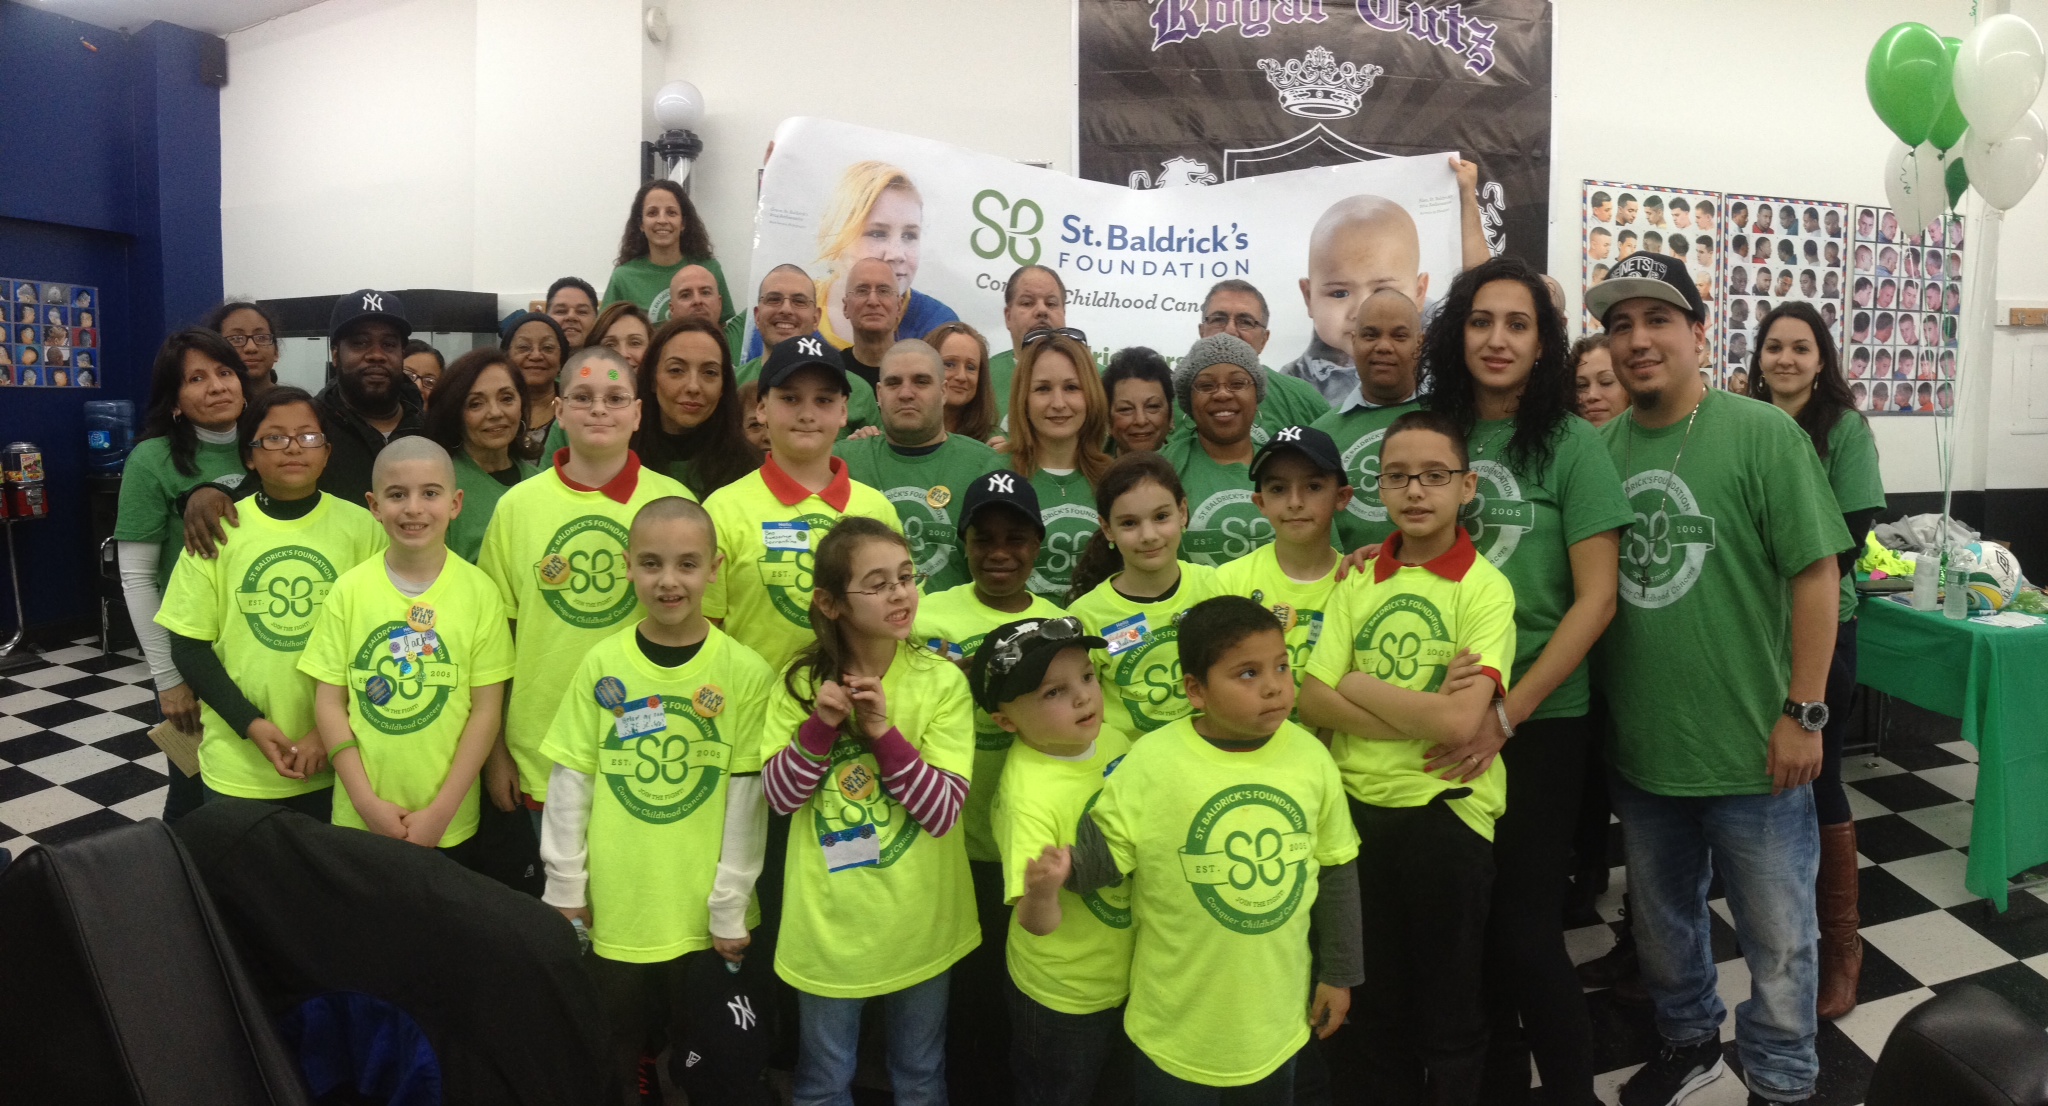 PS 232, South Queens Residents Raise More than 11K for Cancer Research